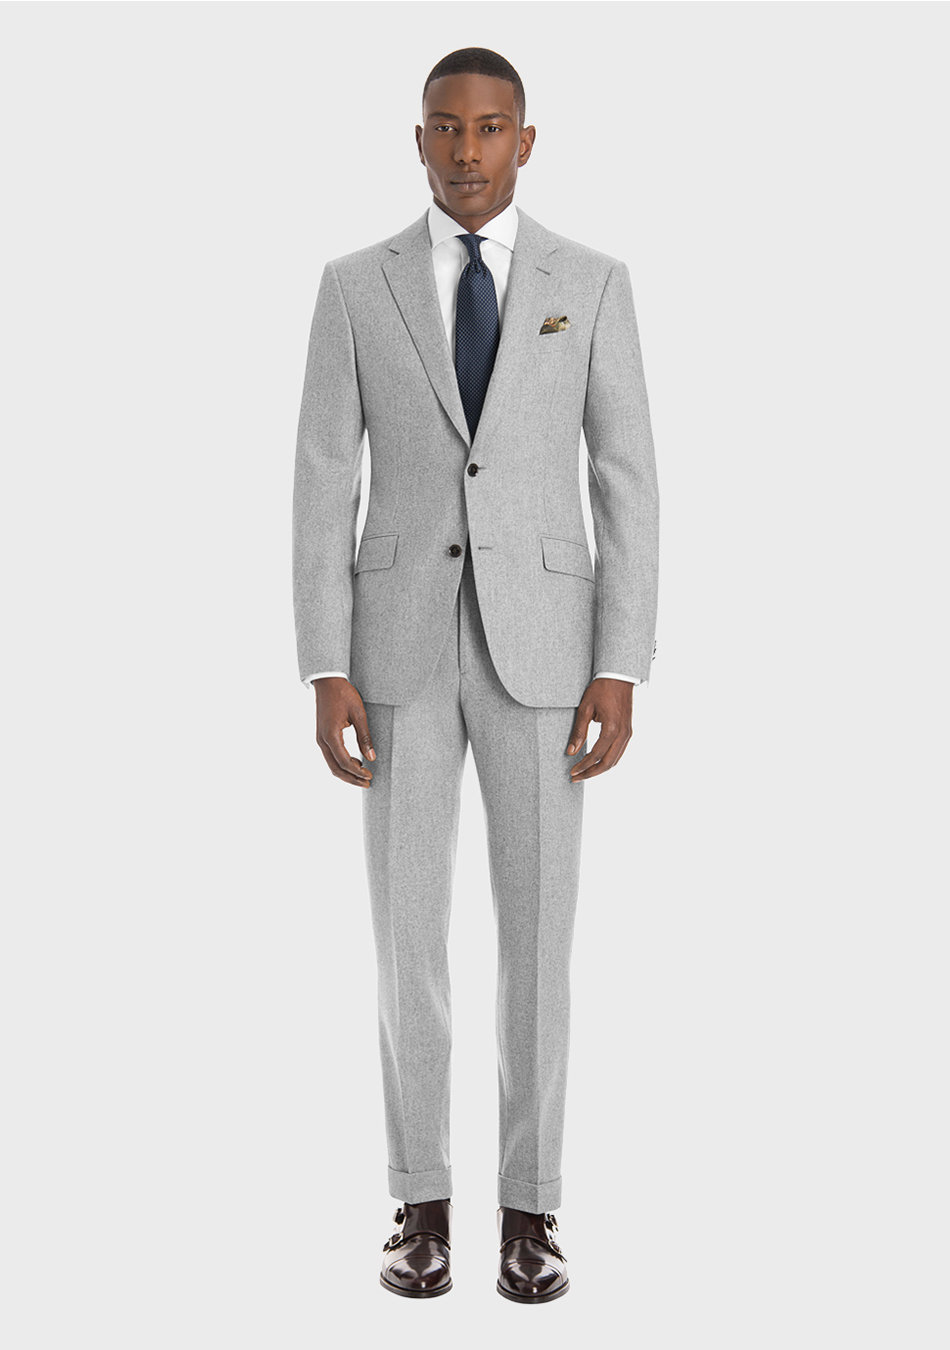 Light grey suit, crisp white shirt, and charcoal dotted tie